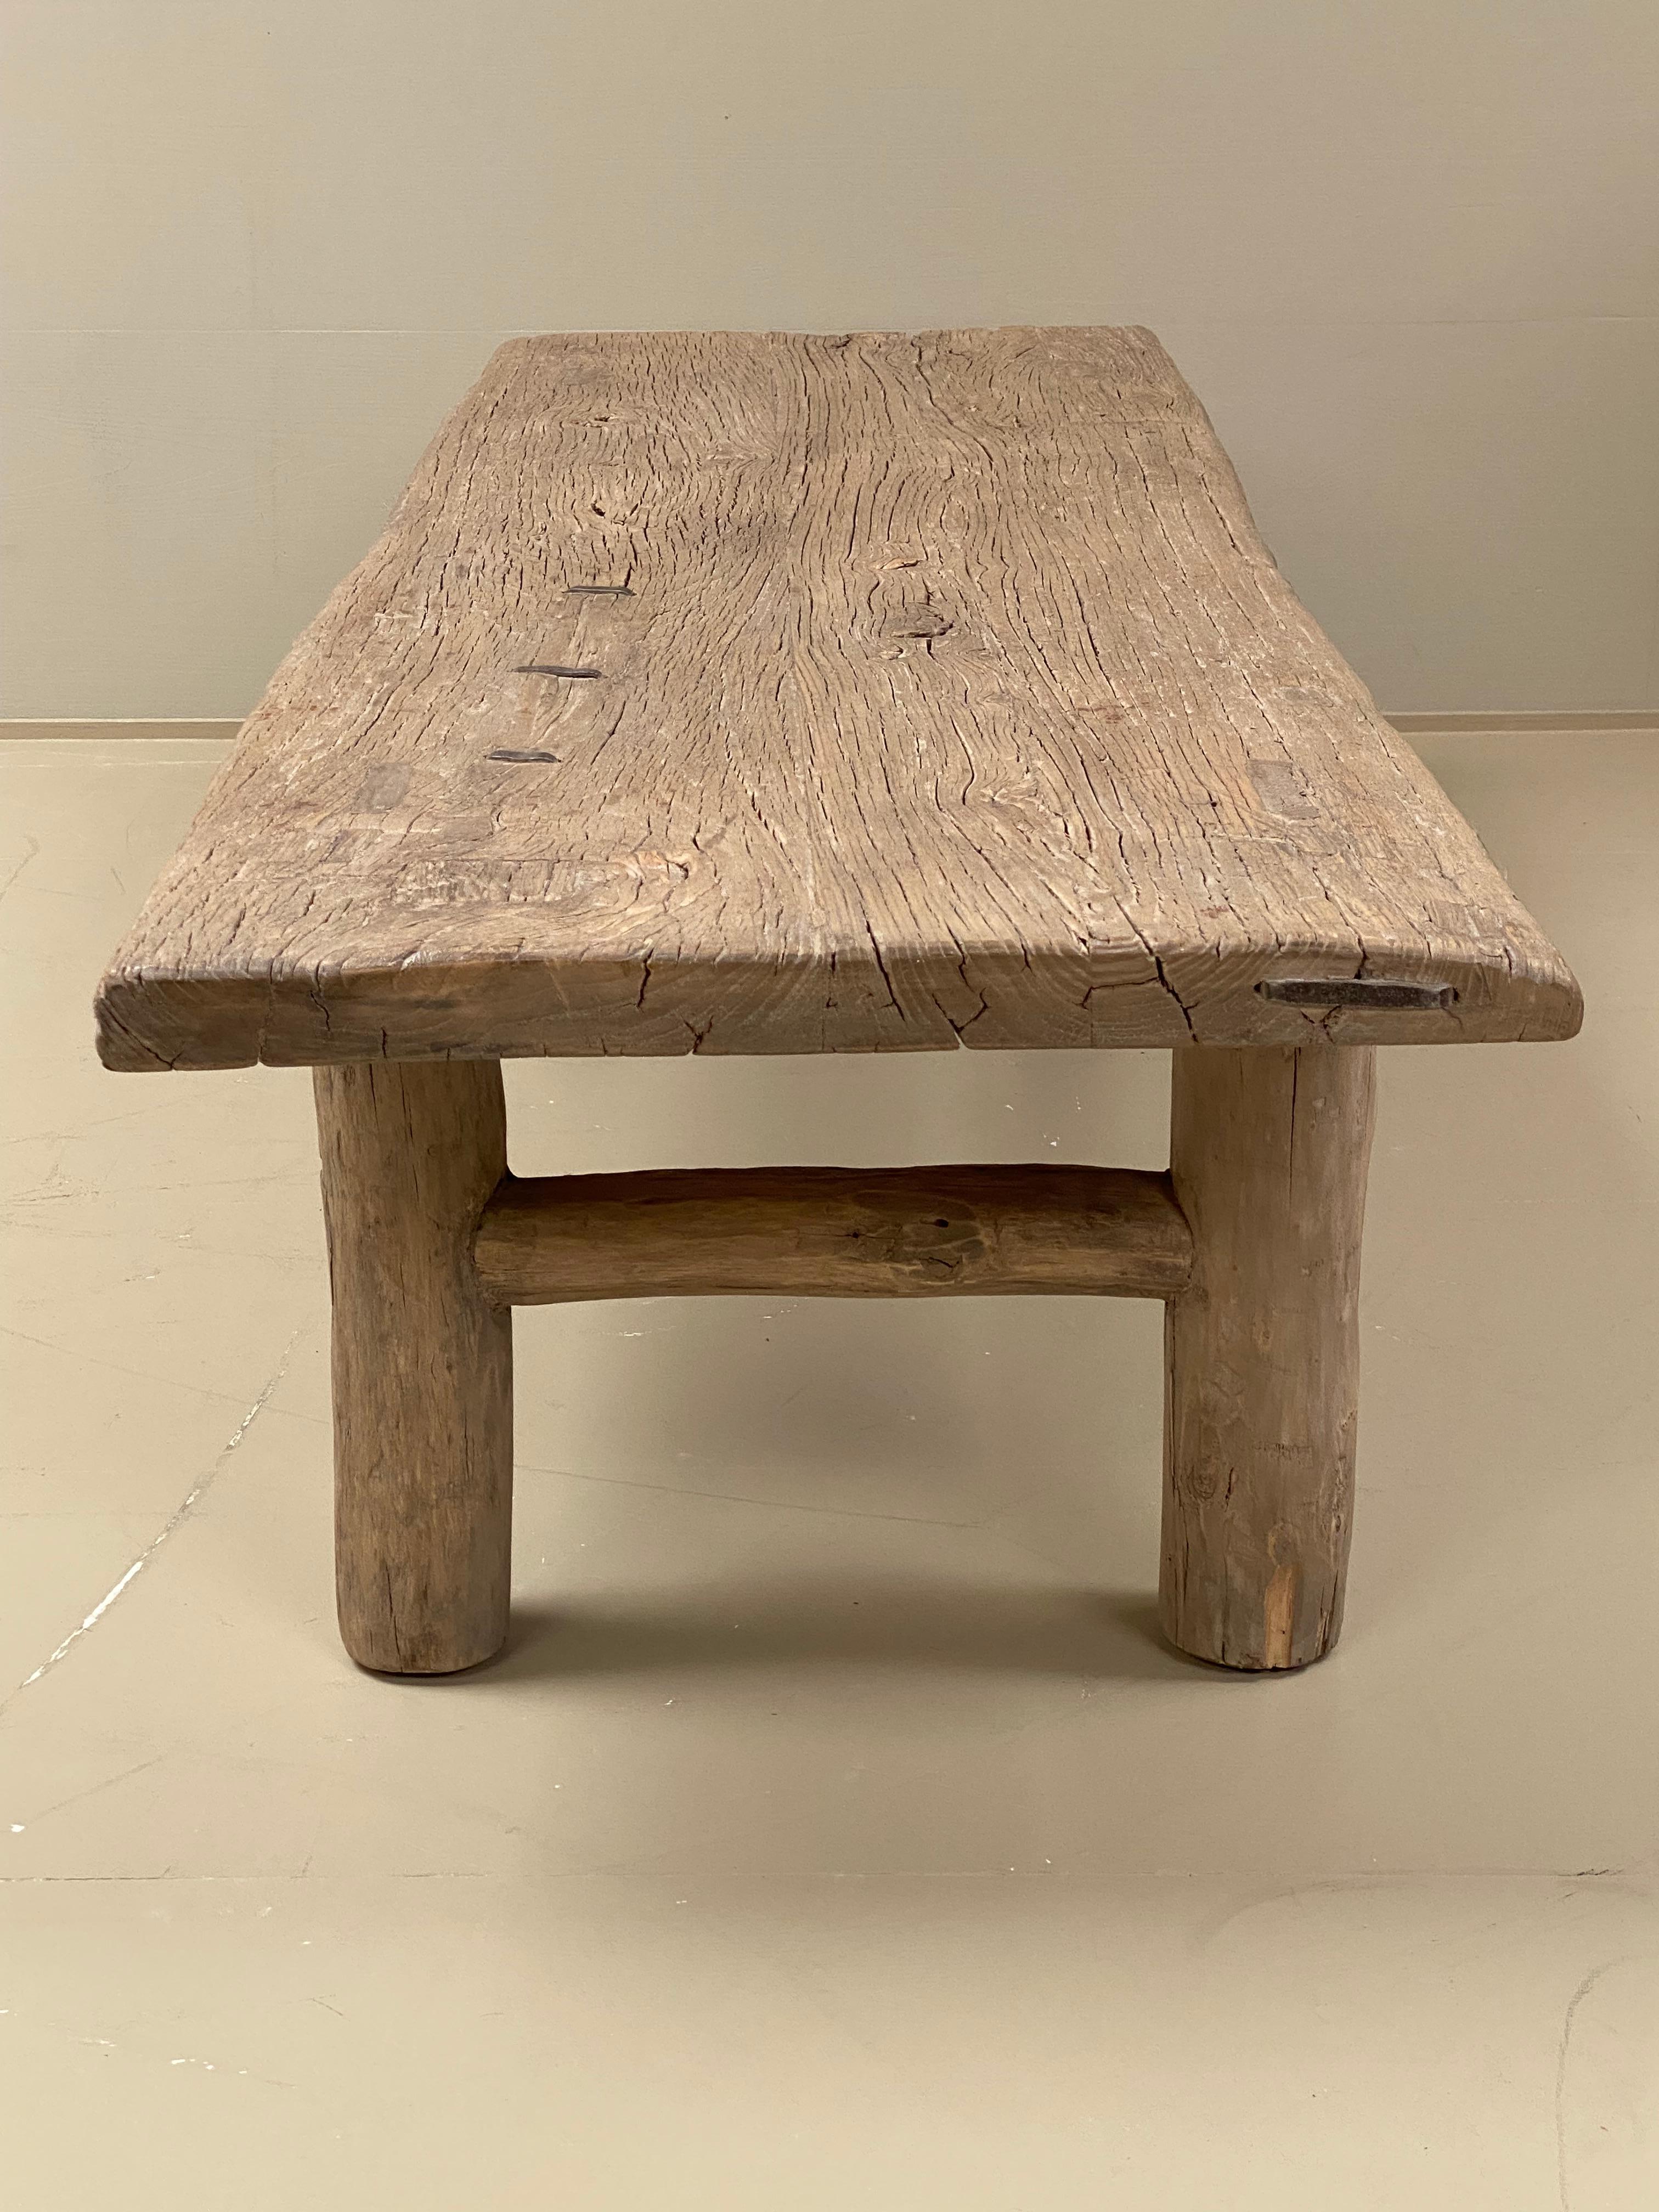 Brutalist Mid-Century Wooden Elm Rustic Coffee table from France, 1960s For Sale 4